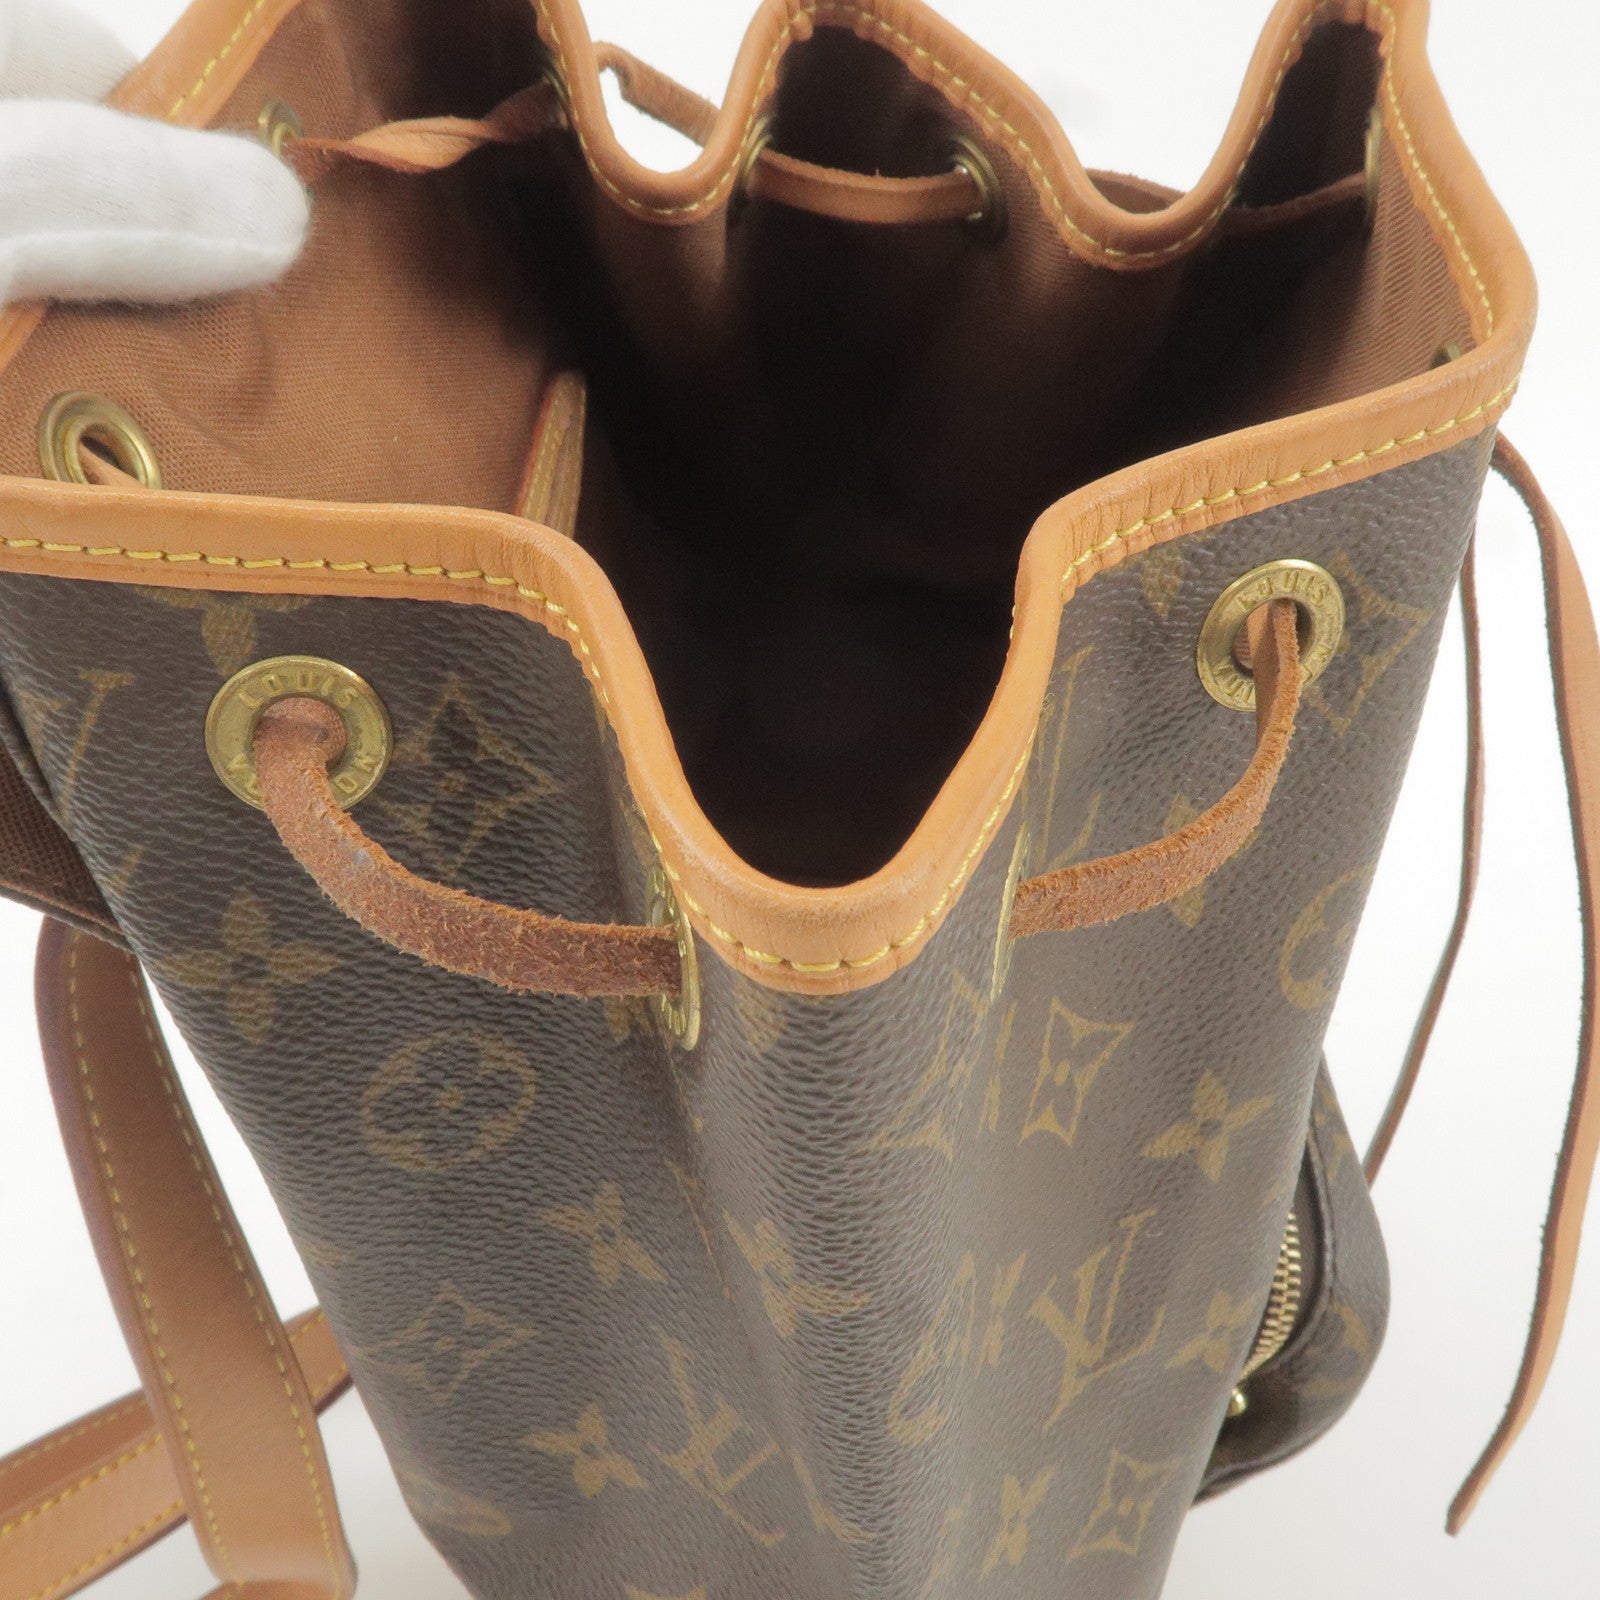 Brown pre-owned Louis Vuitton 2021 Monogram Coffee Cup pouch bag